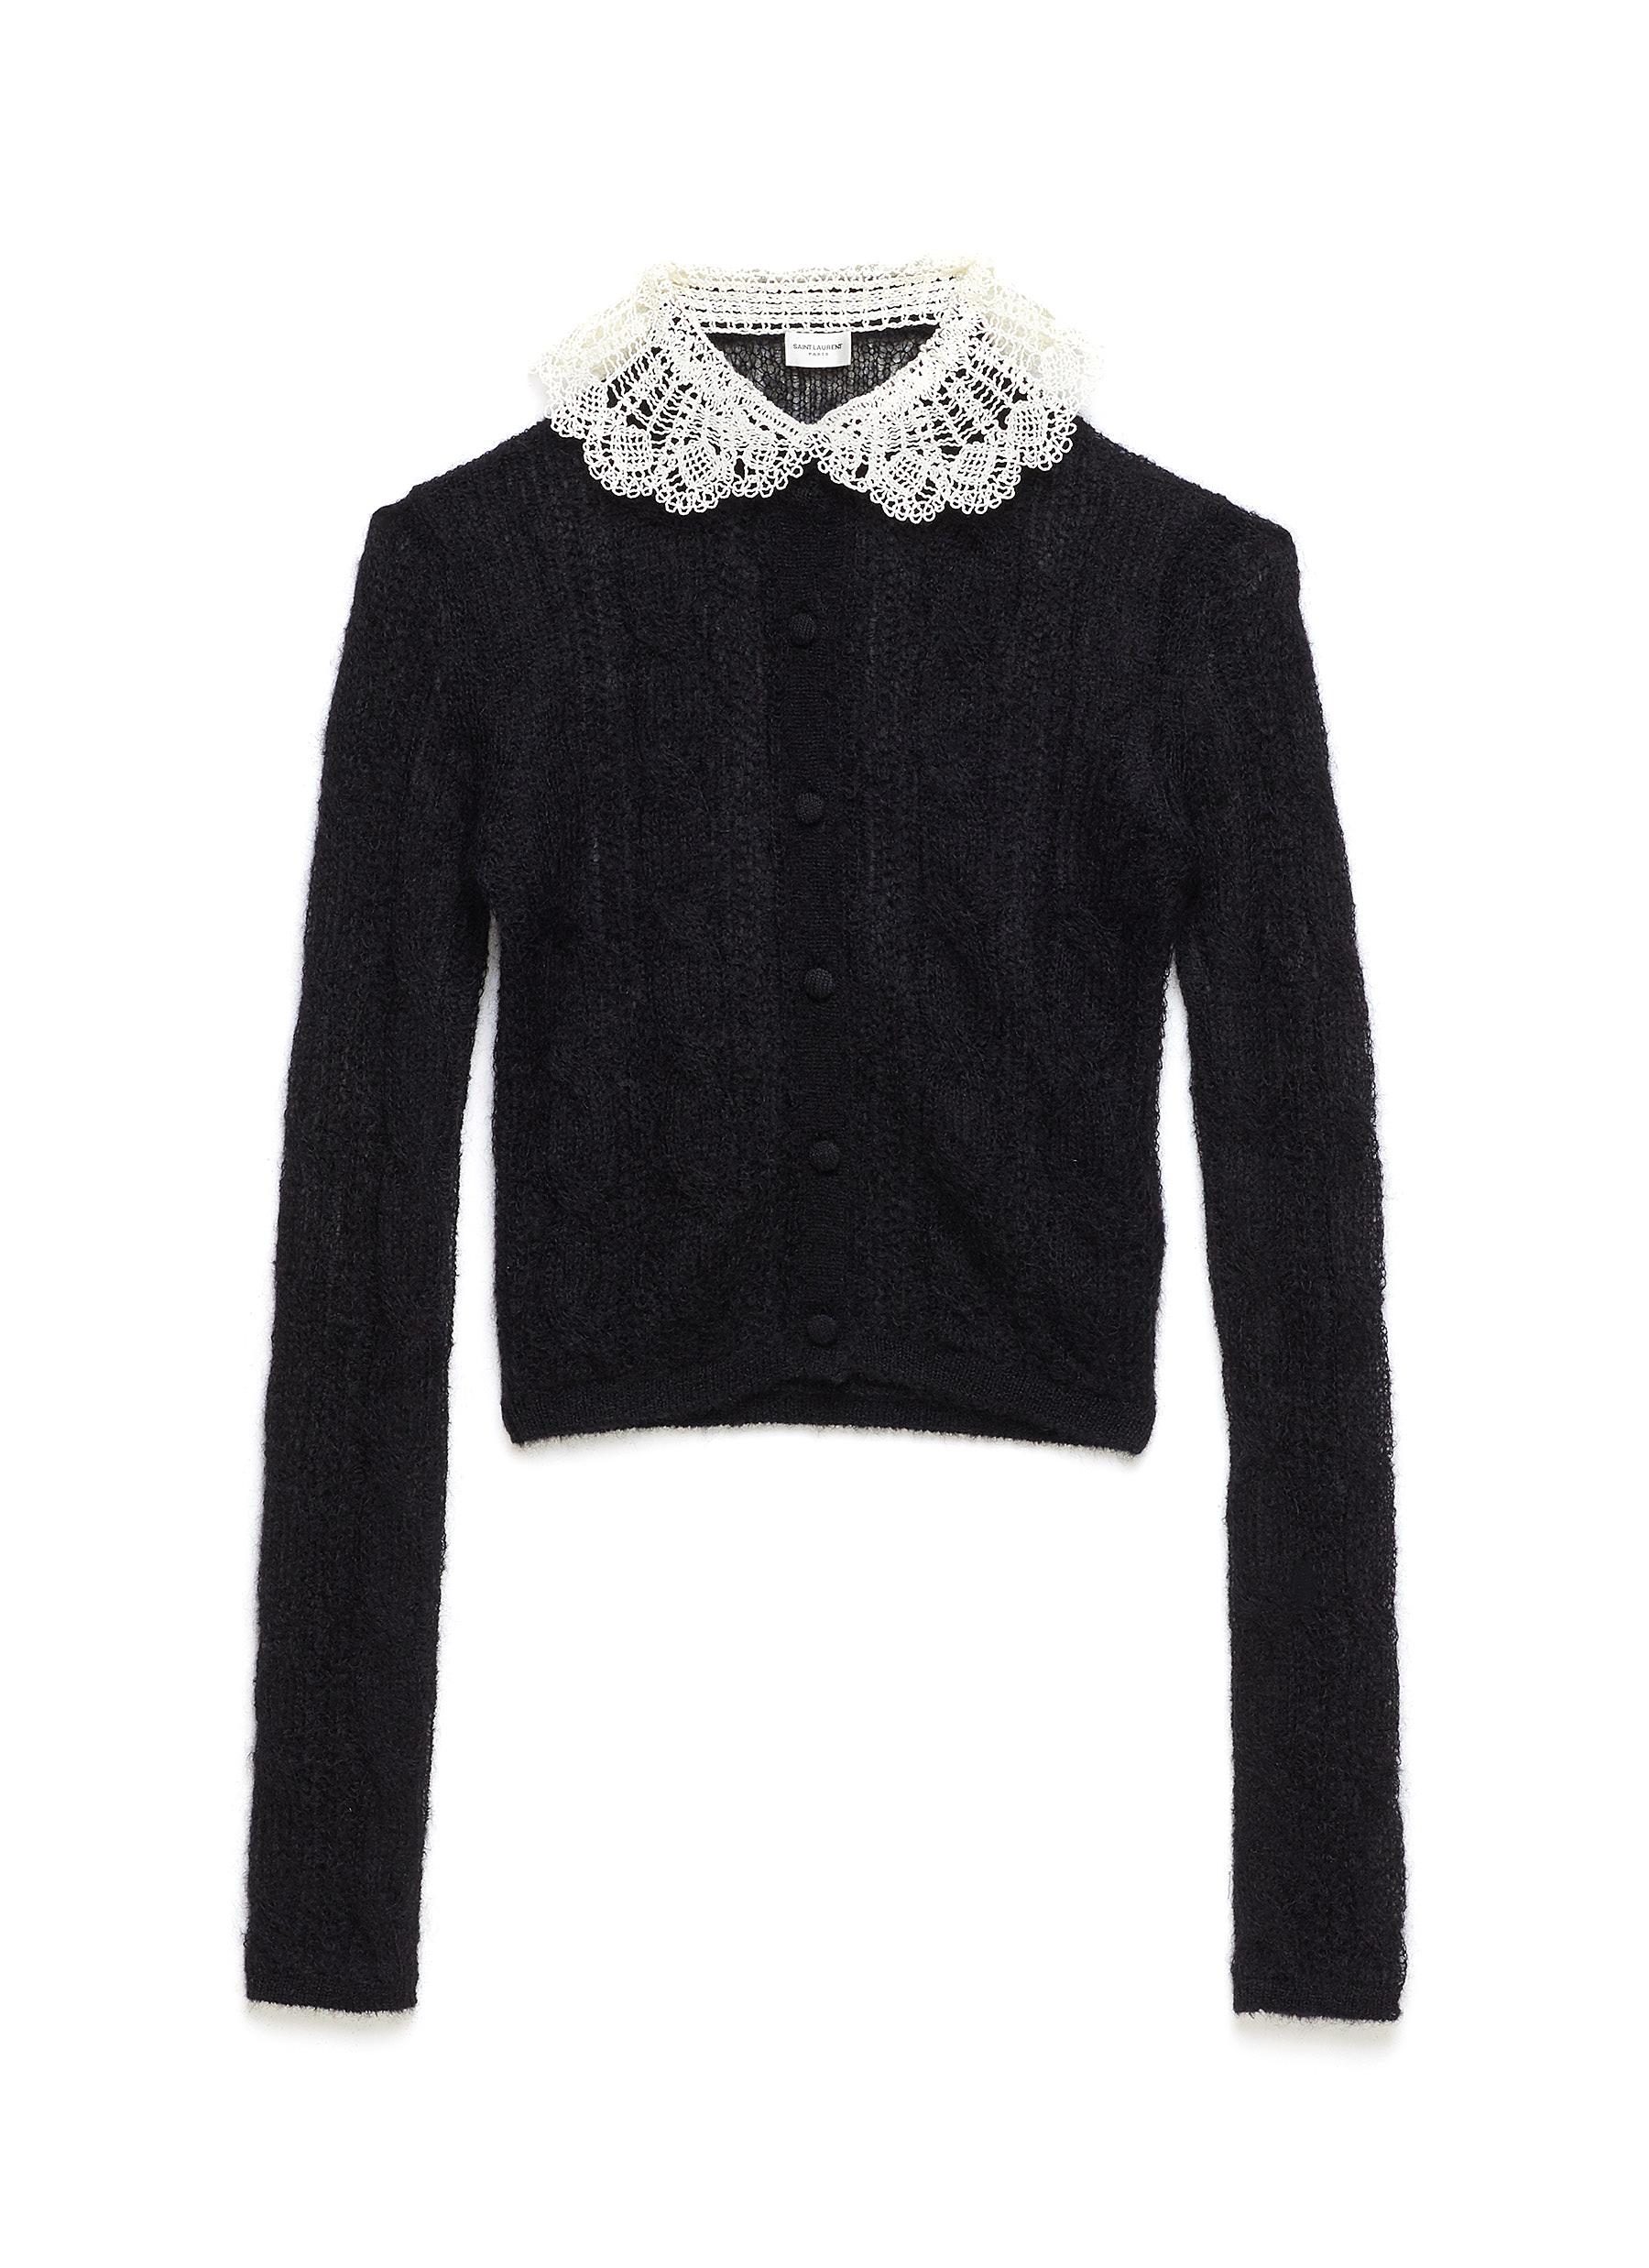 LONG SLEEVE CONTRASTING COLLAR LACE TOP